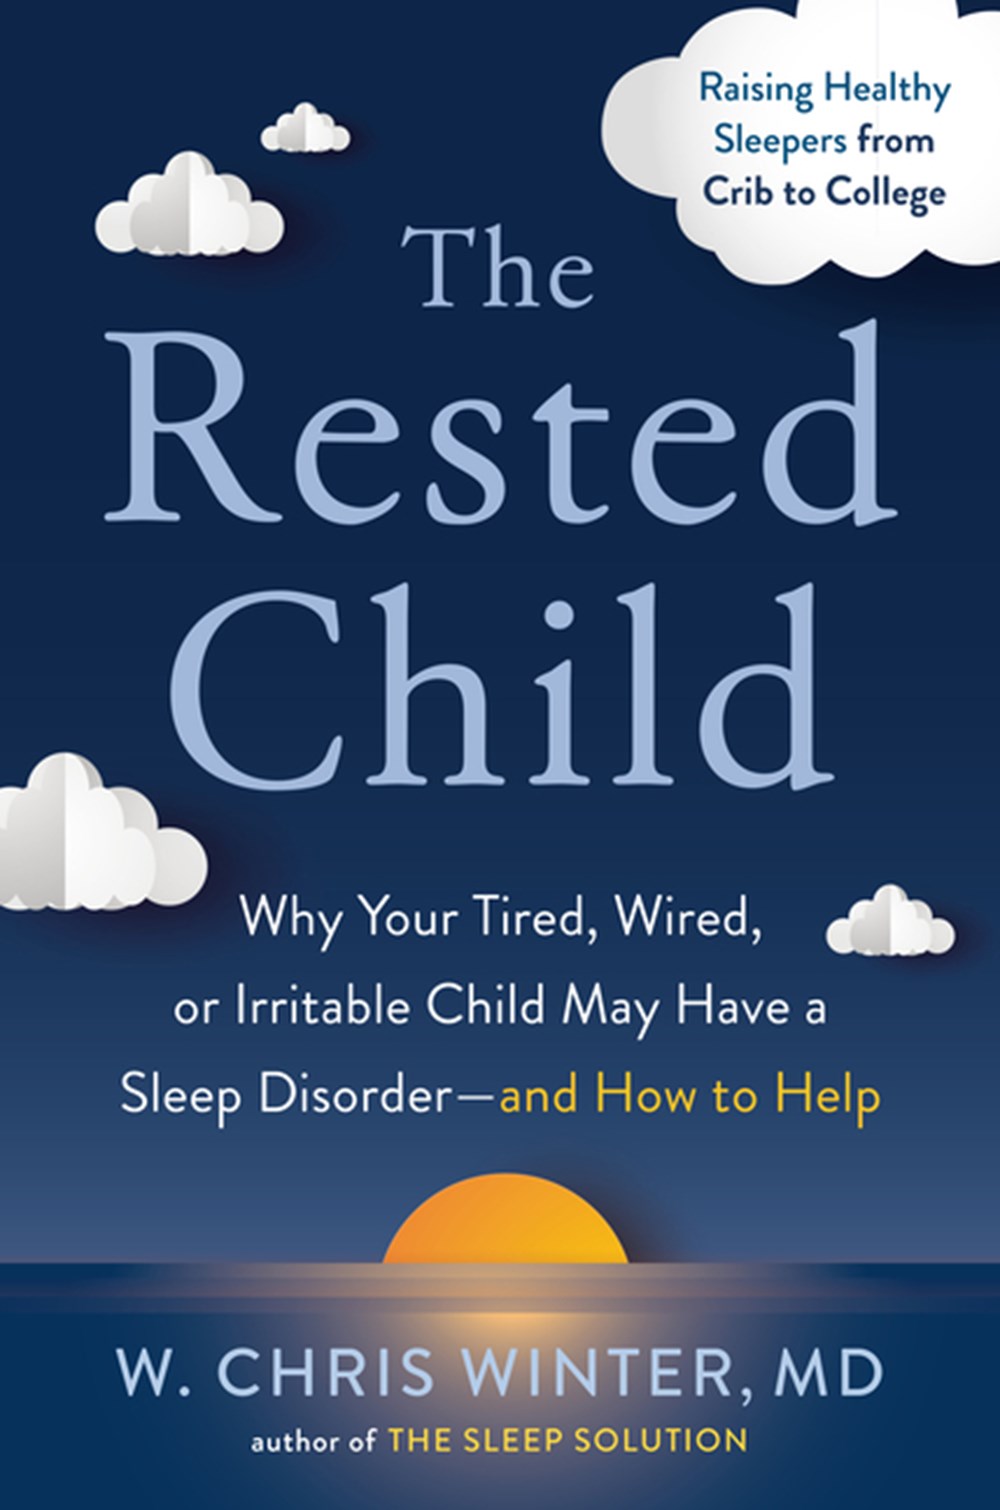 Rested Child Why Your Tired, Wired, or Irritable Child May Have a Sleep Disorder--And How to Help